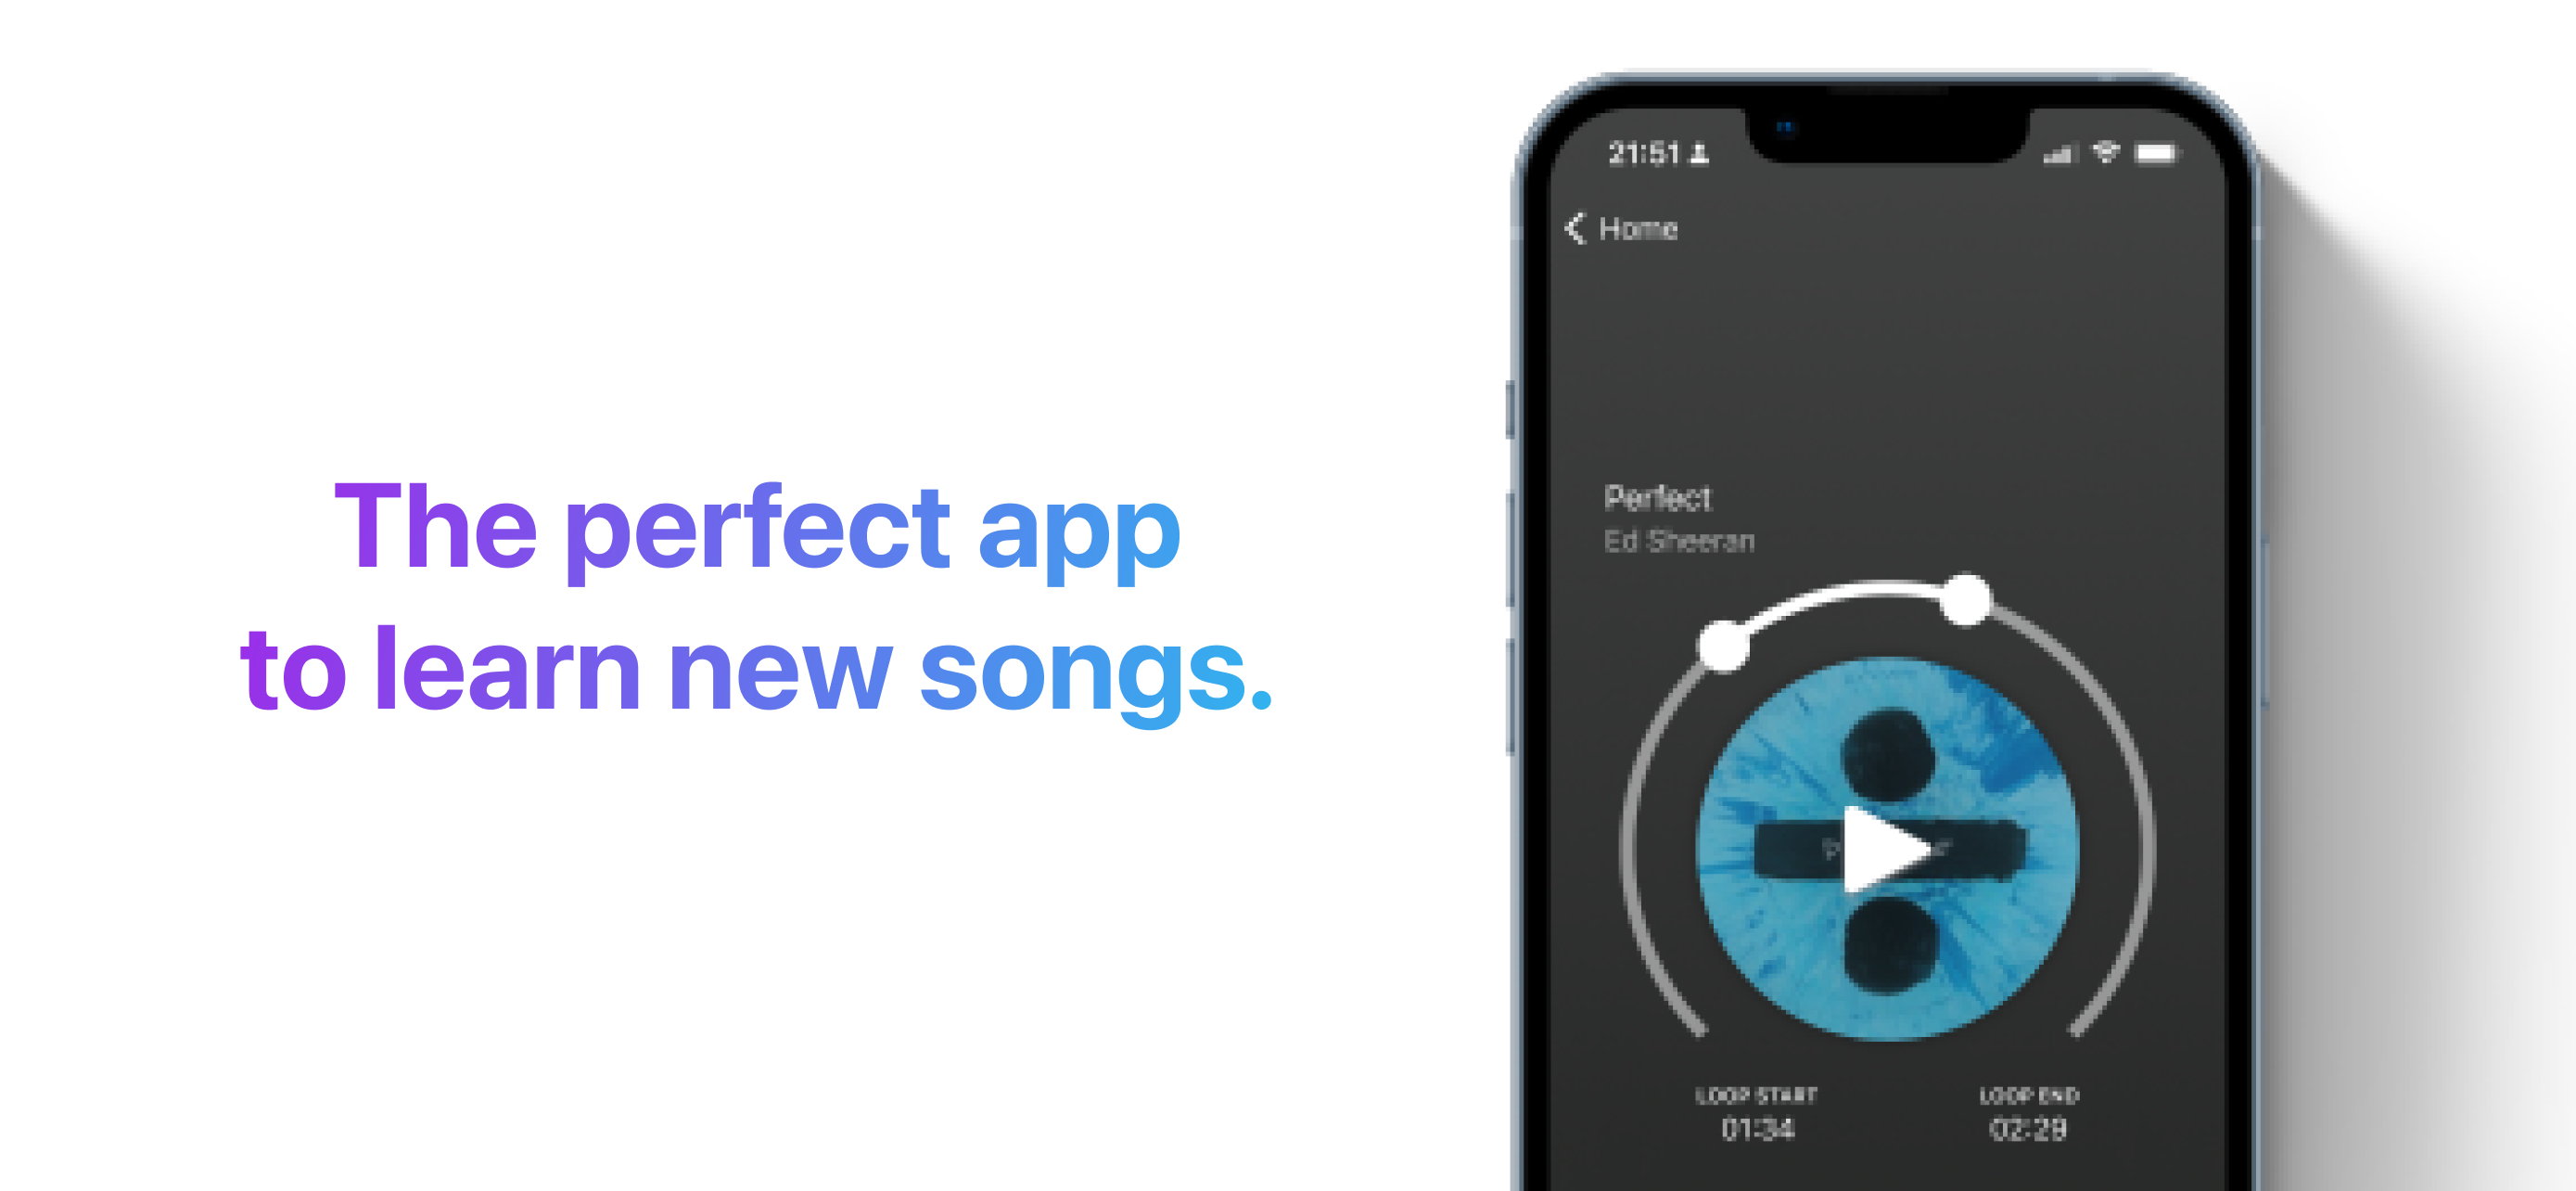 An App for learning songs